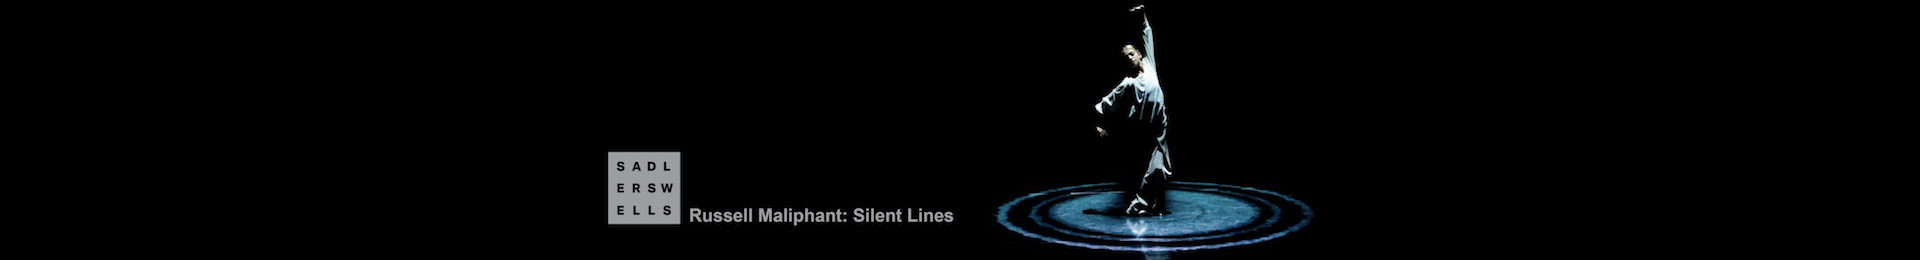 Russell Maliphant Dance Company: Silent Lines banner image